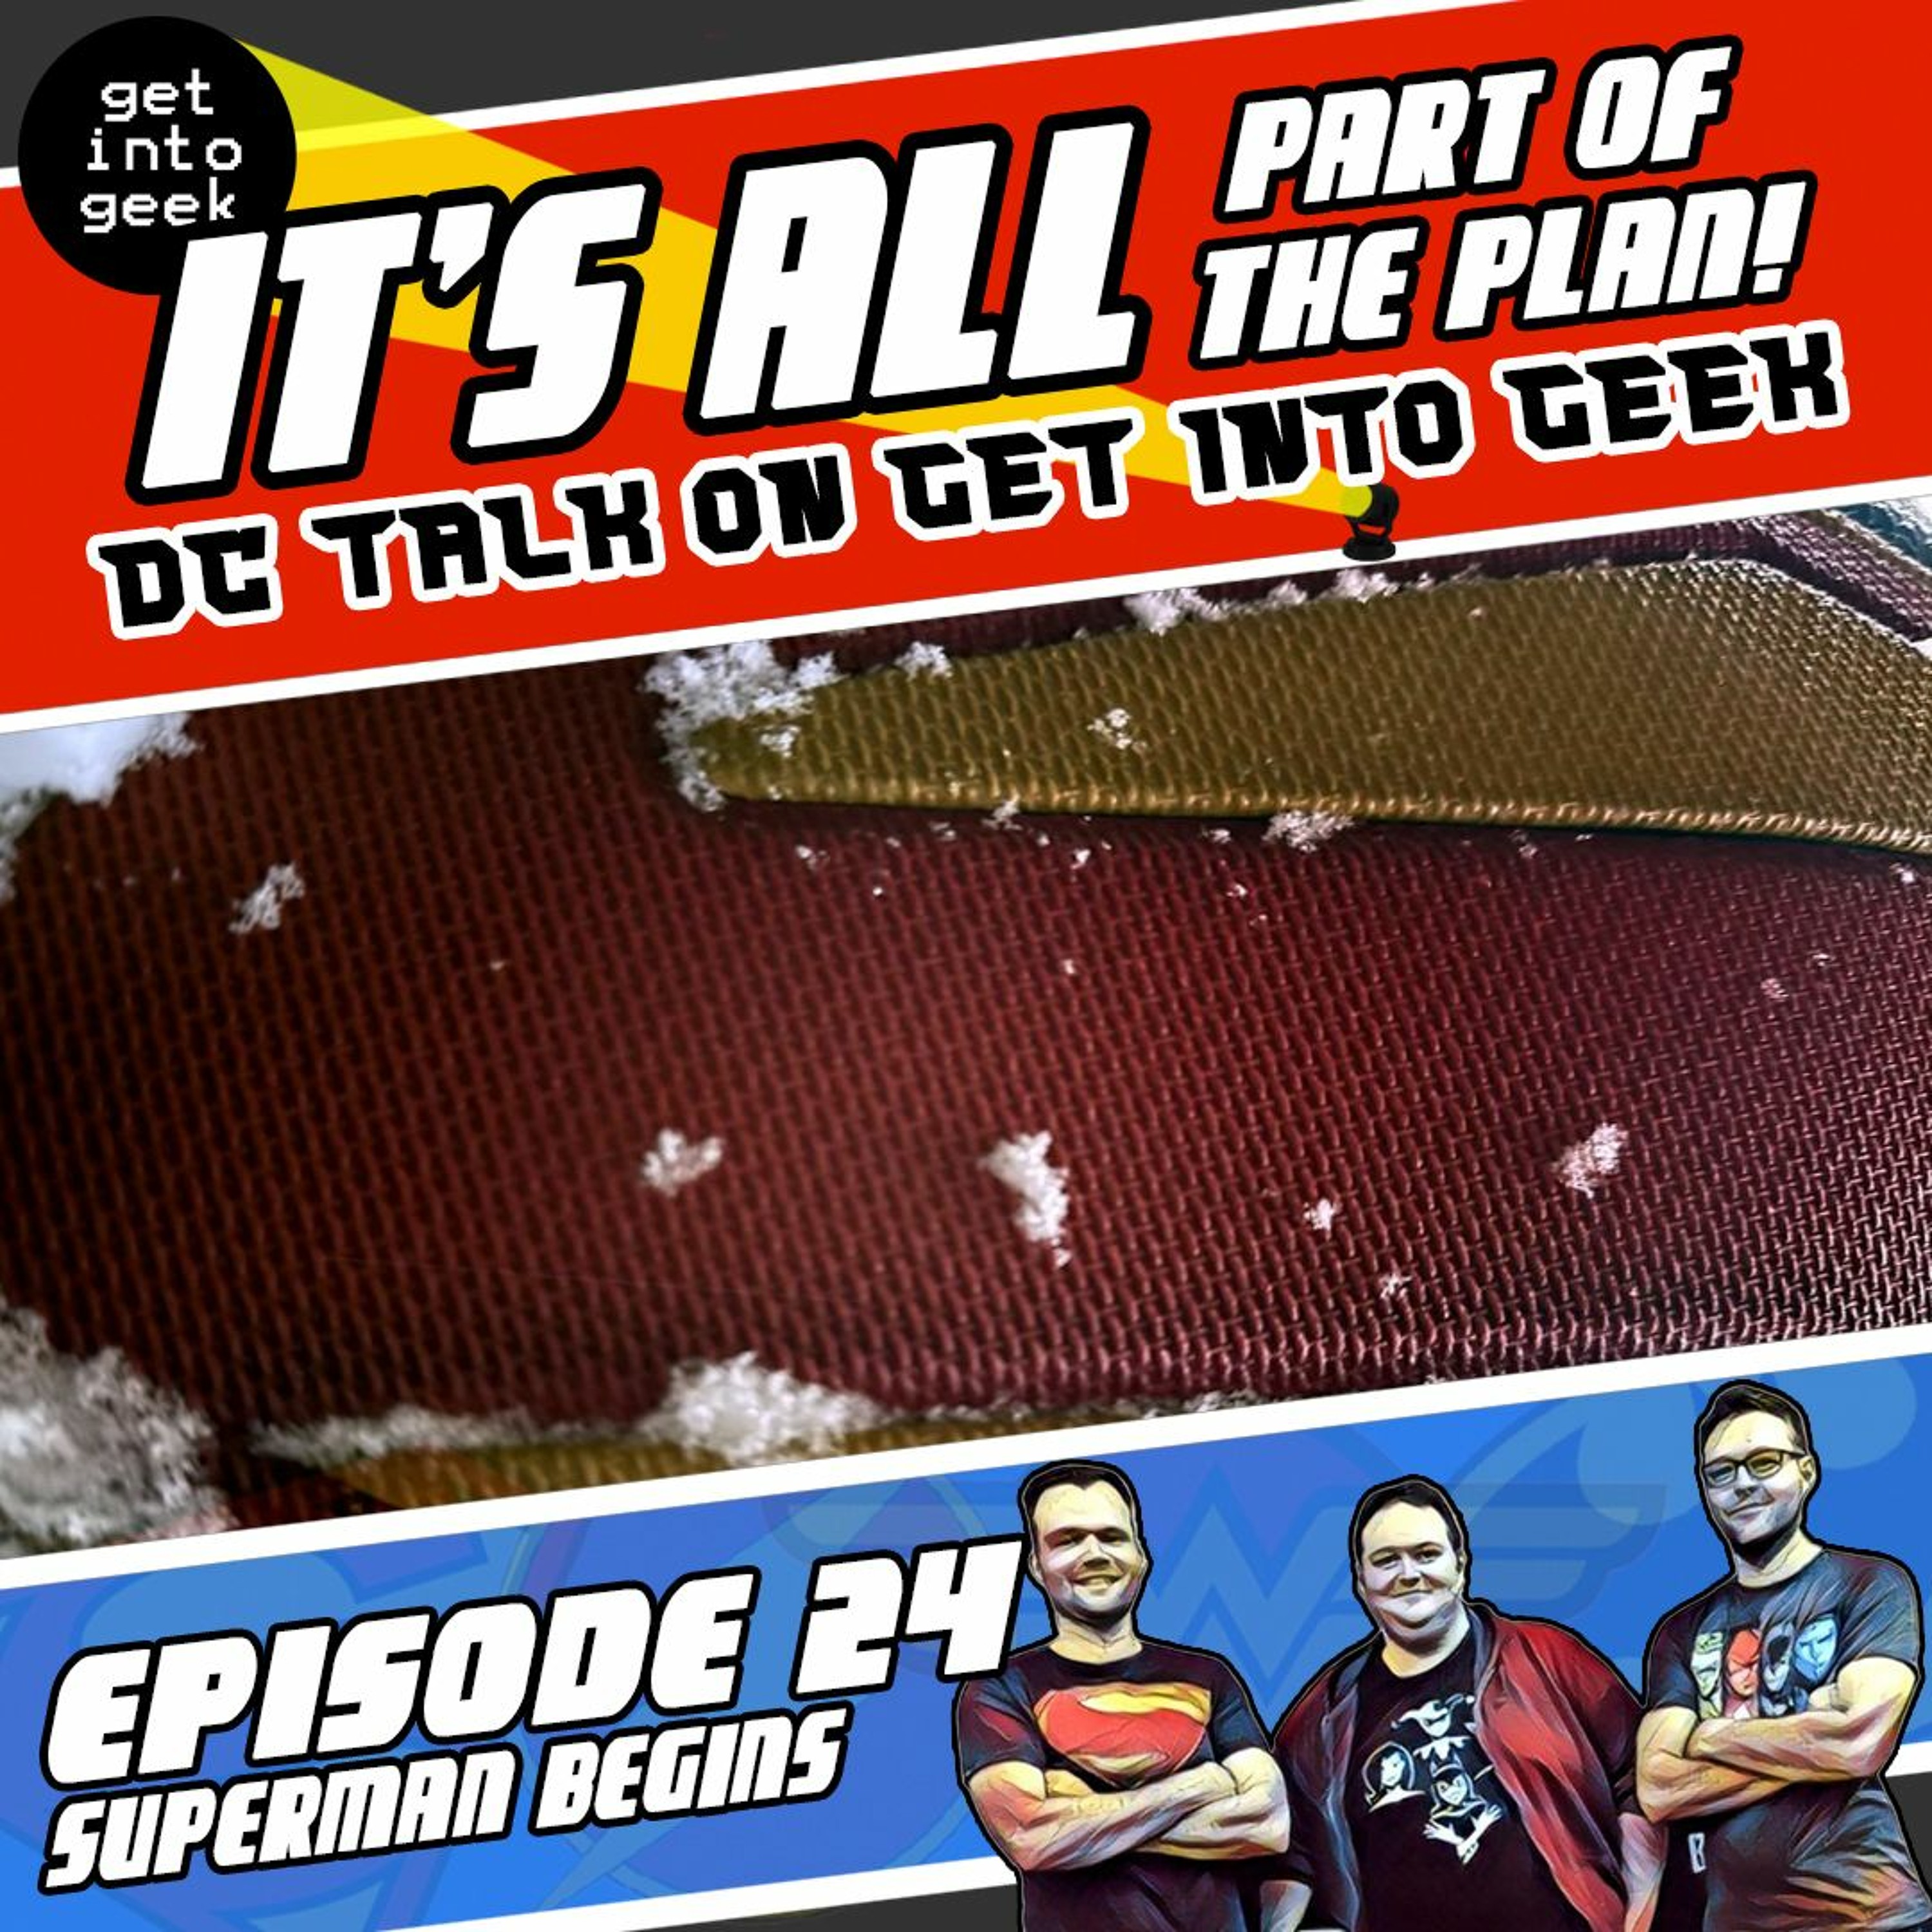 Superman Begins (It’s All Part Of The Plan - DC Talk Episode 1.24)